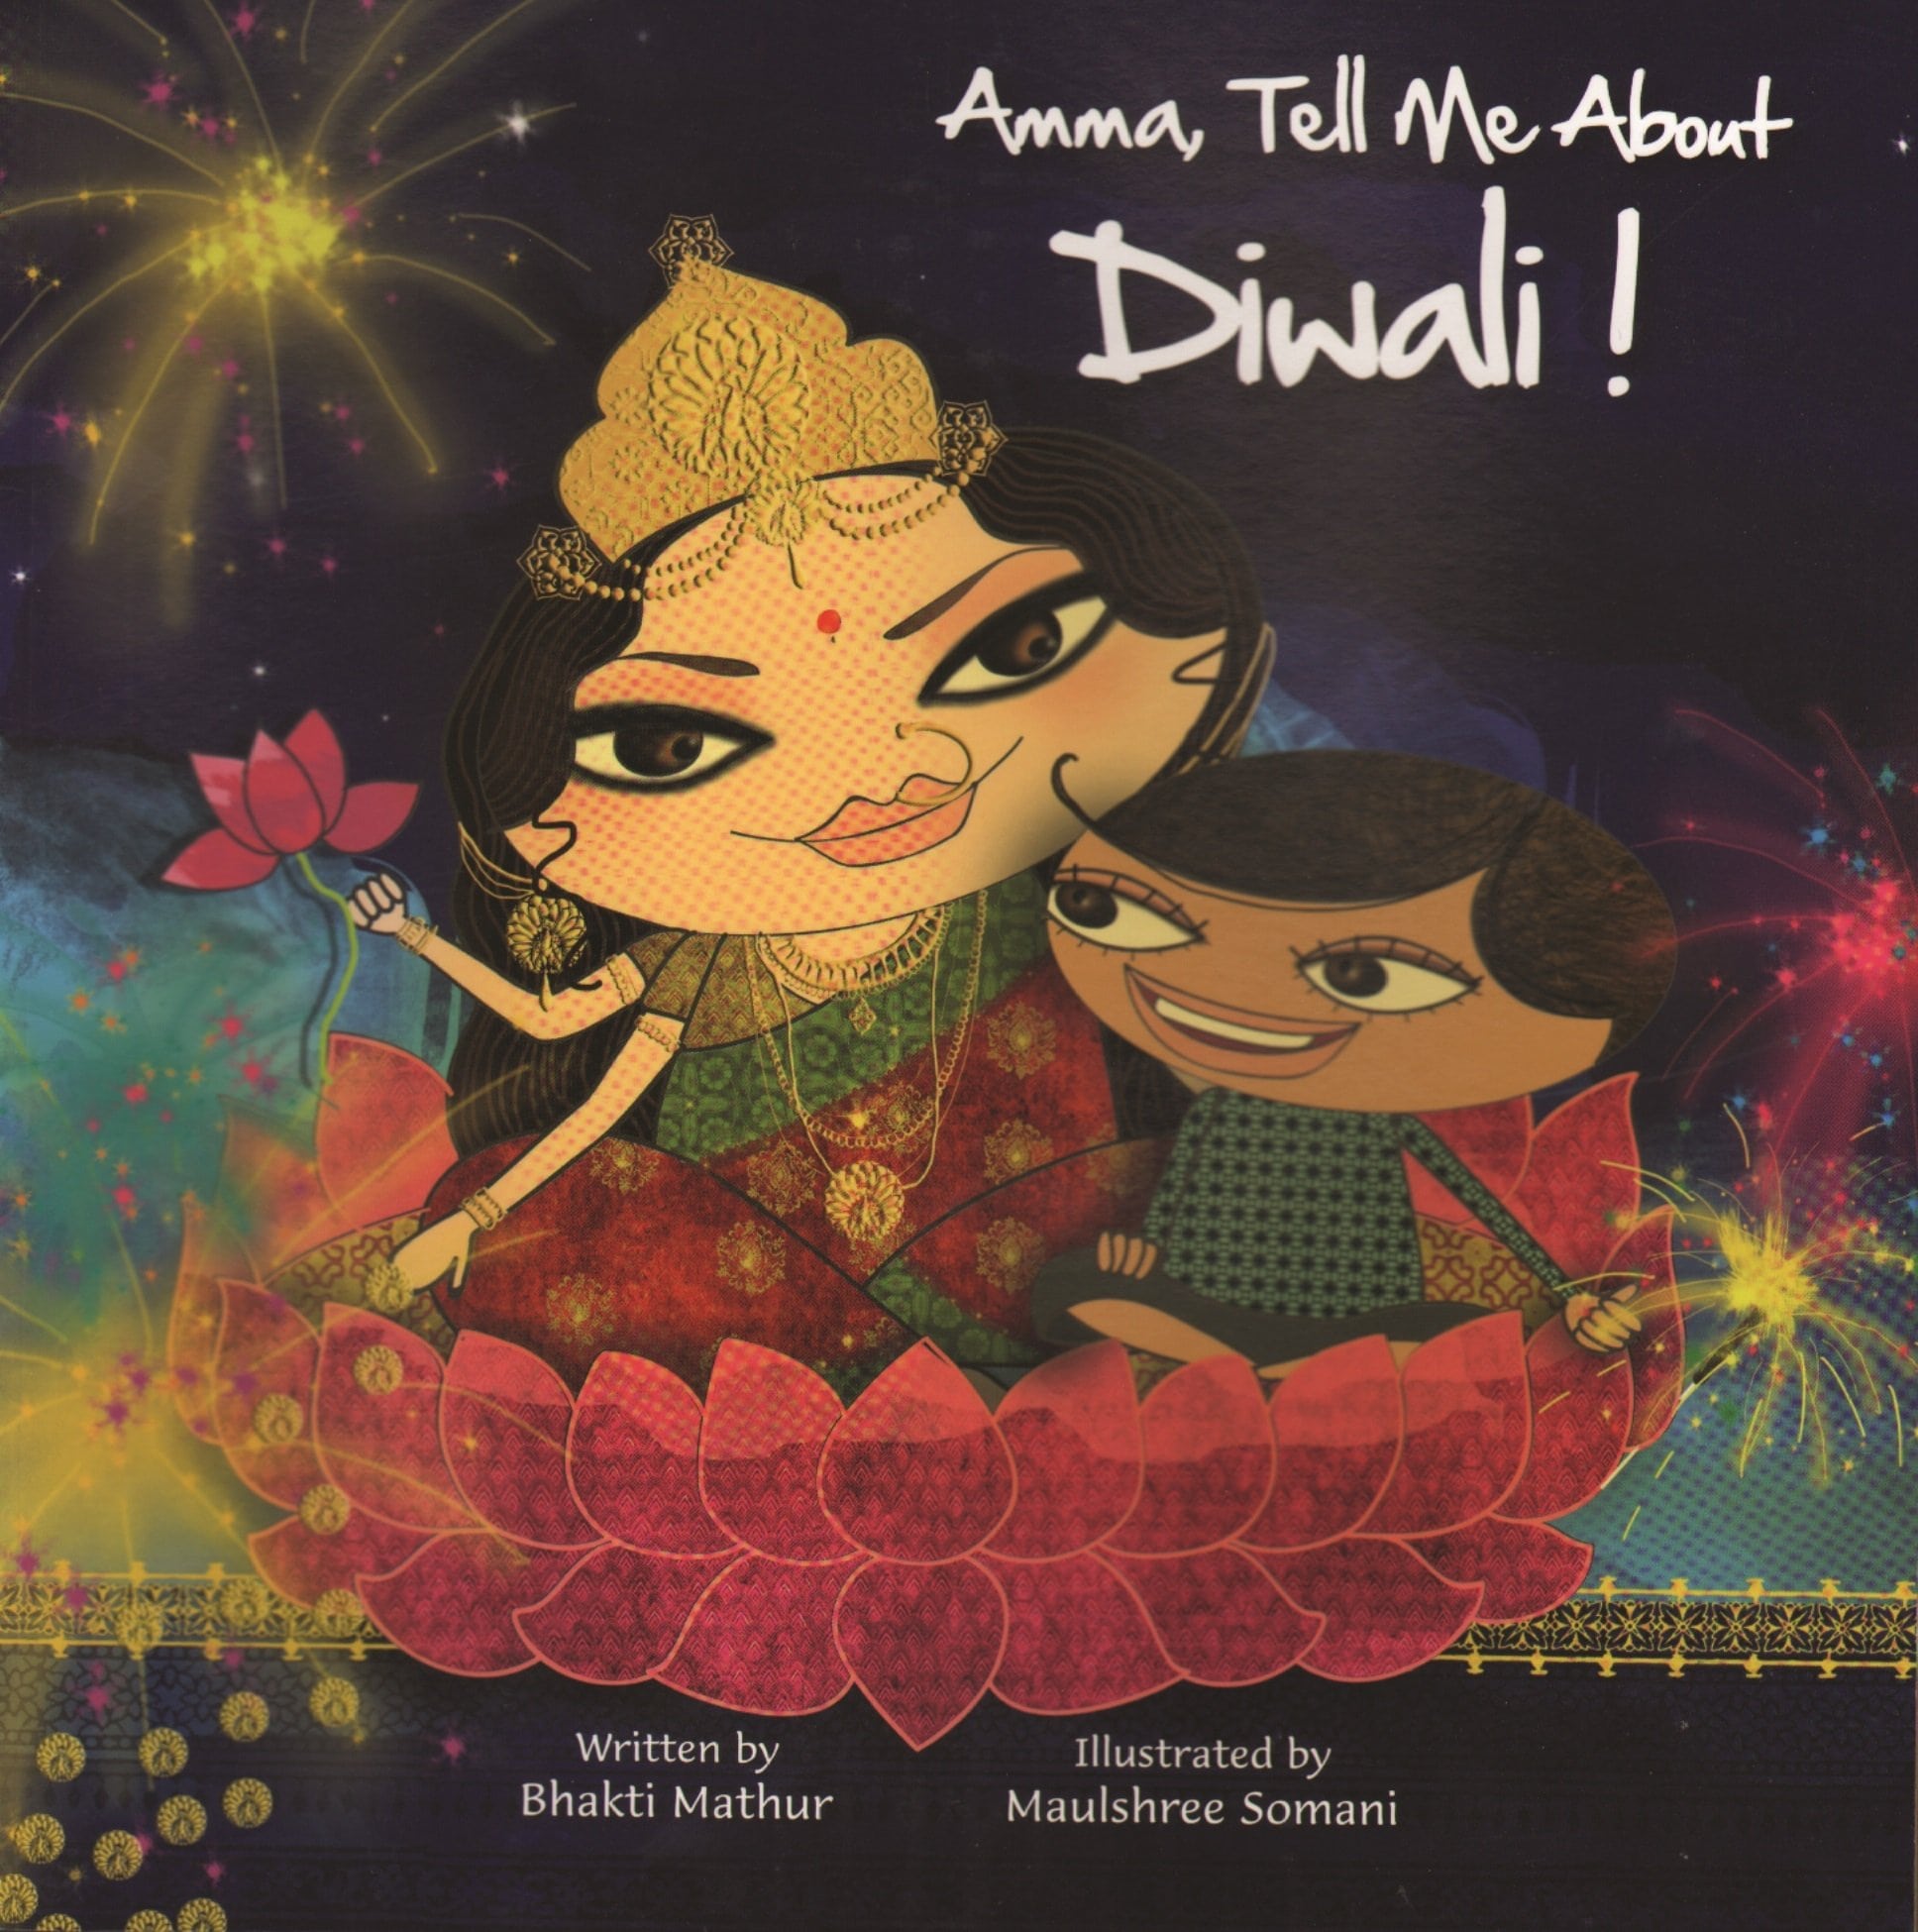 IMG : Amma Tell me about Diwali